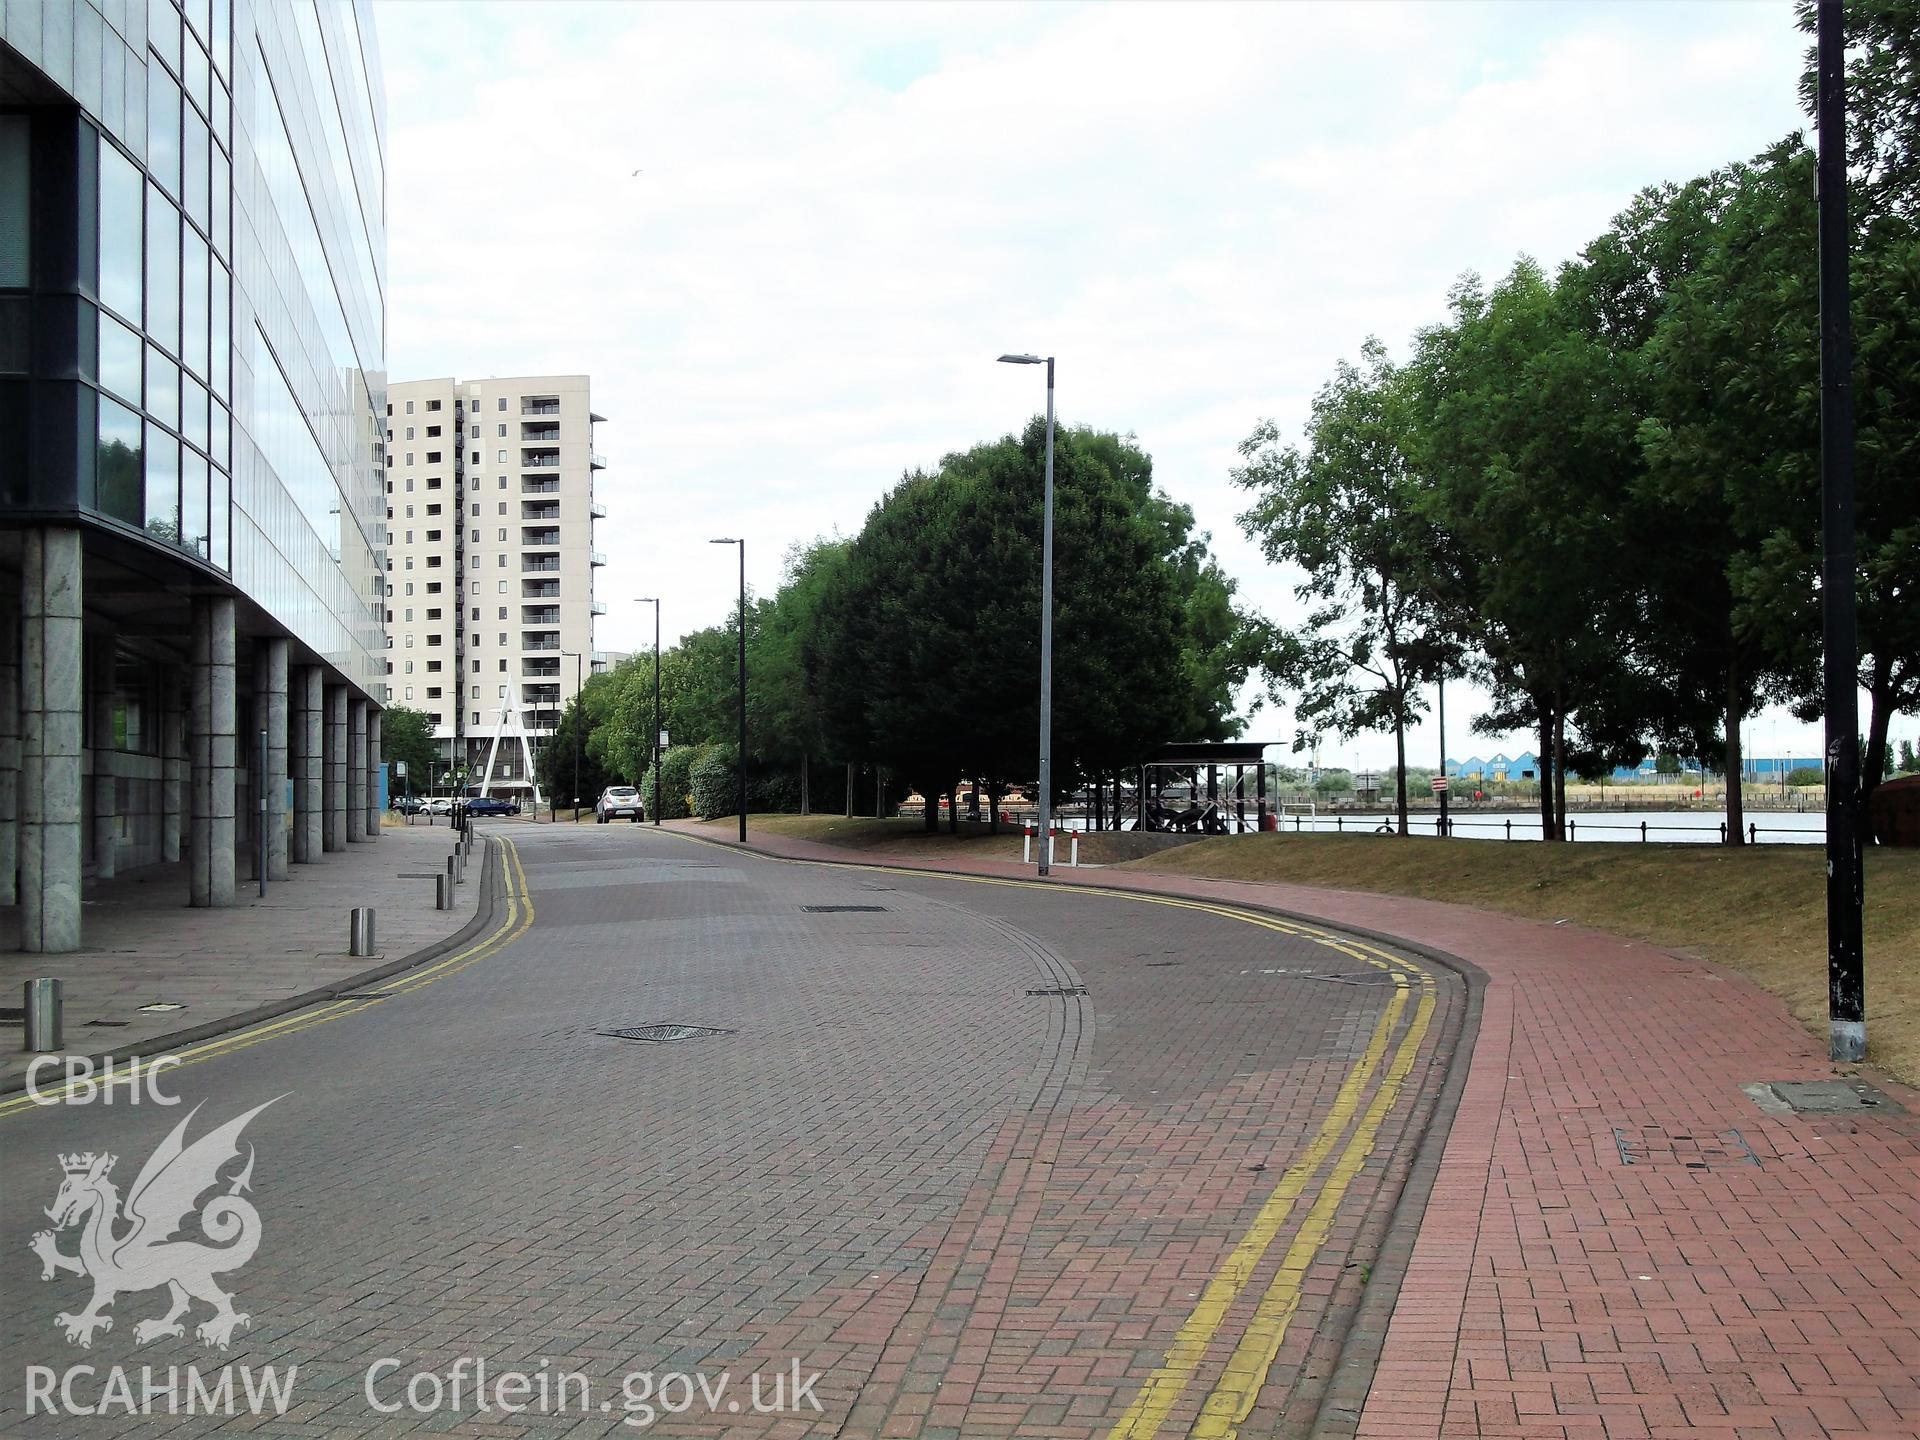 Colour photograph of Britannia Quay (road), Roath Basin, Butetown, Cardiff. Photographed during survey conducted by Adam N. Coward on 17th July 2018.